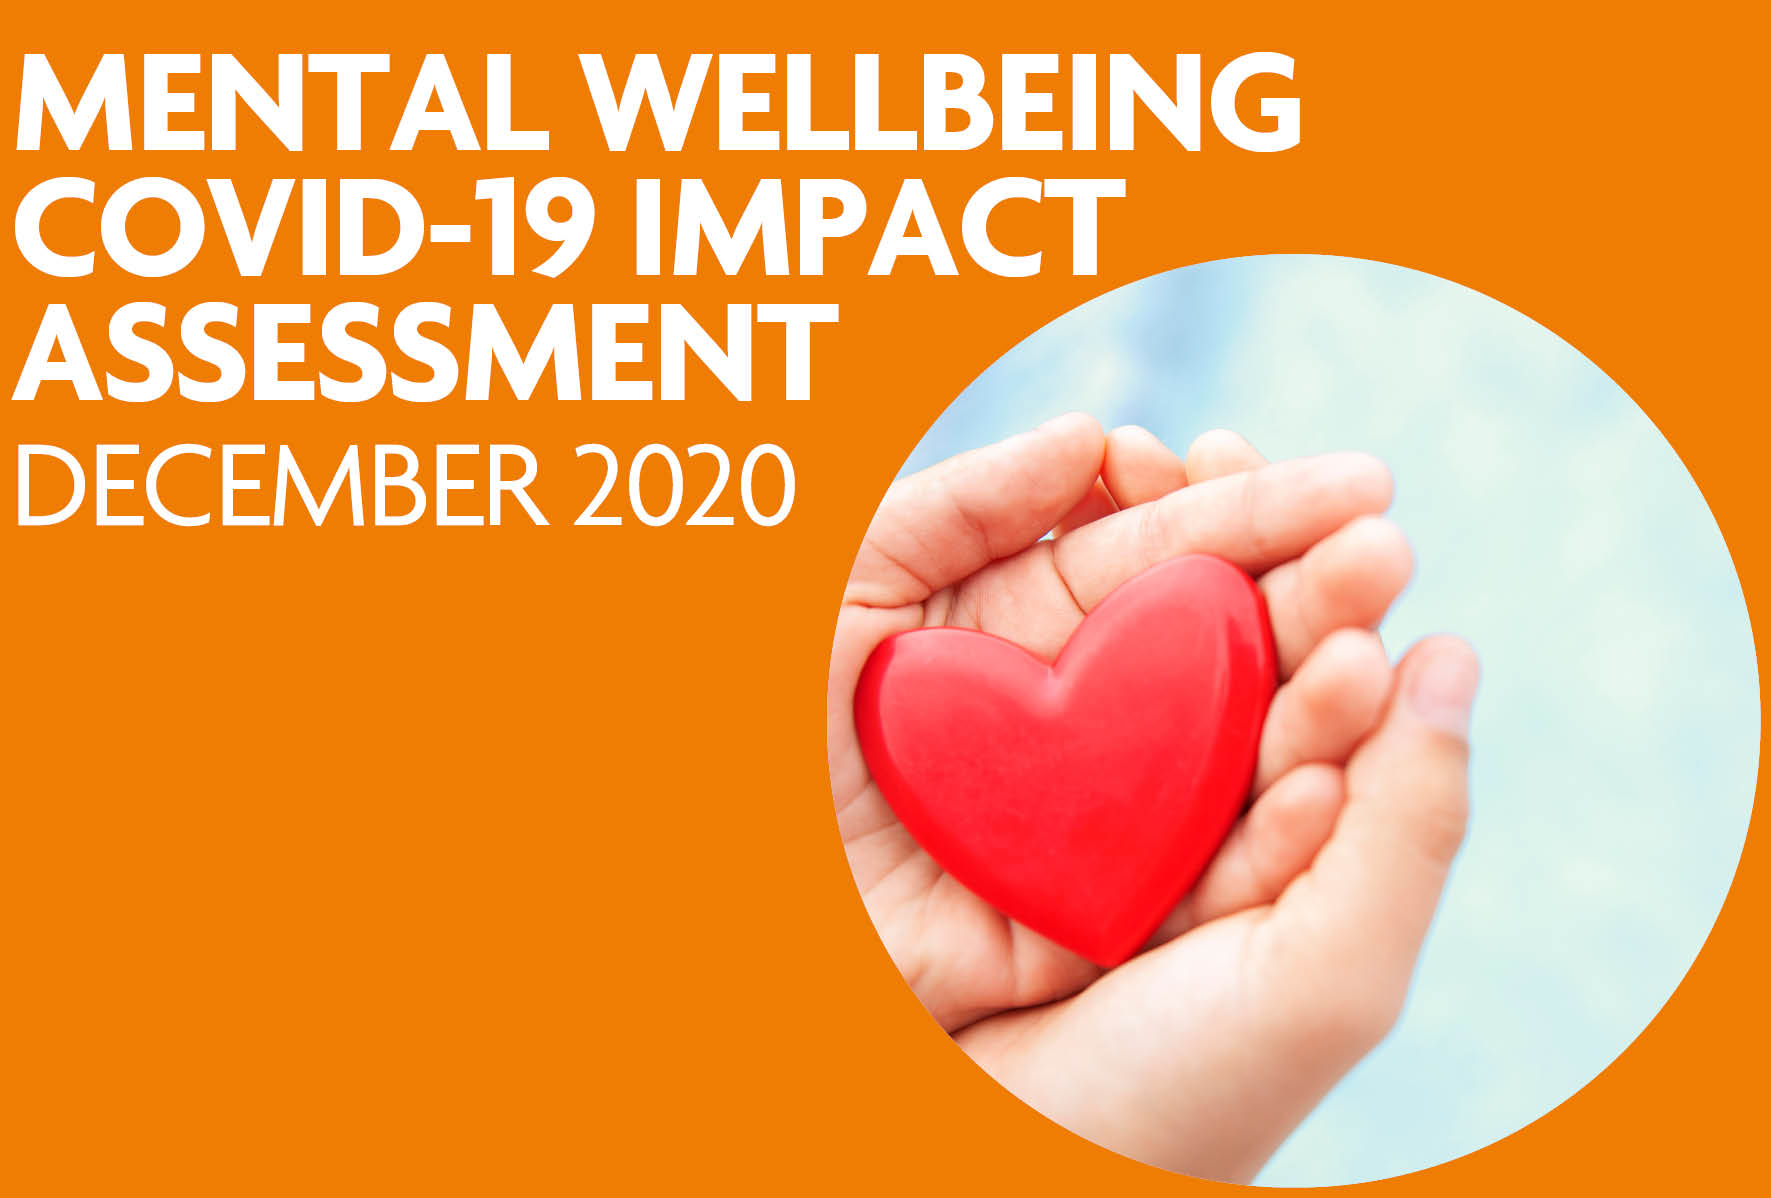 mental wellbeing covid-19 assessment - december 2020